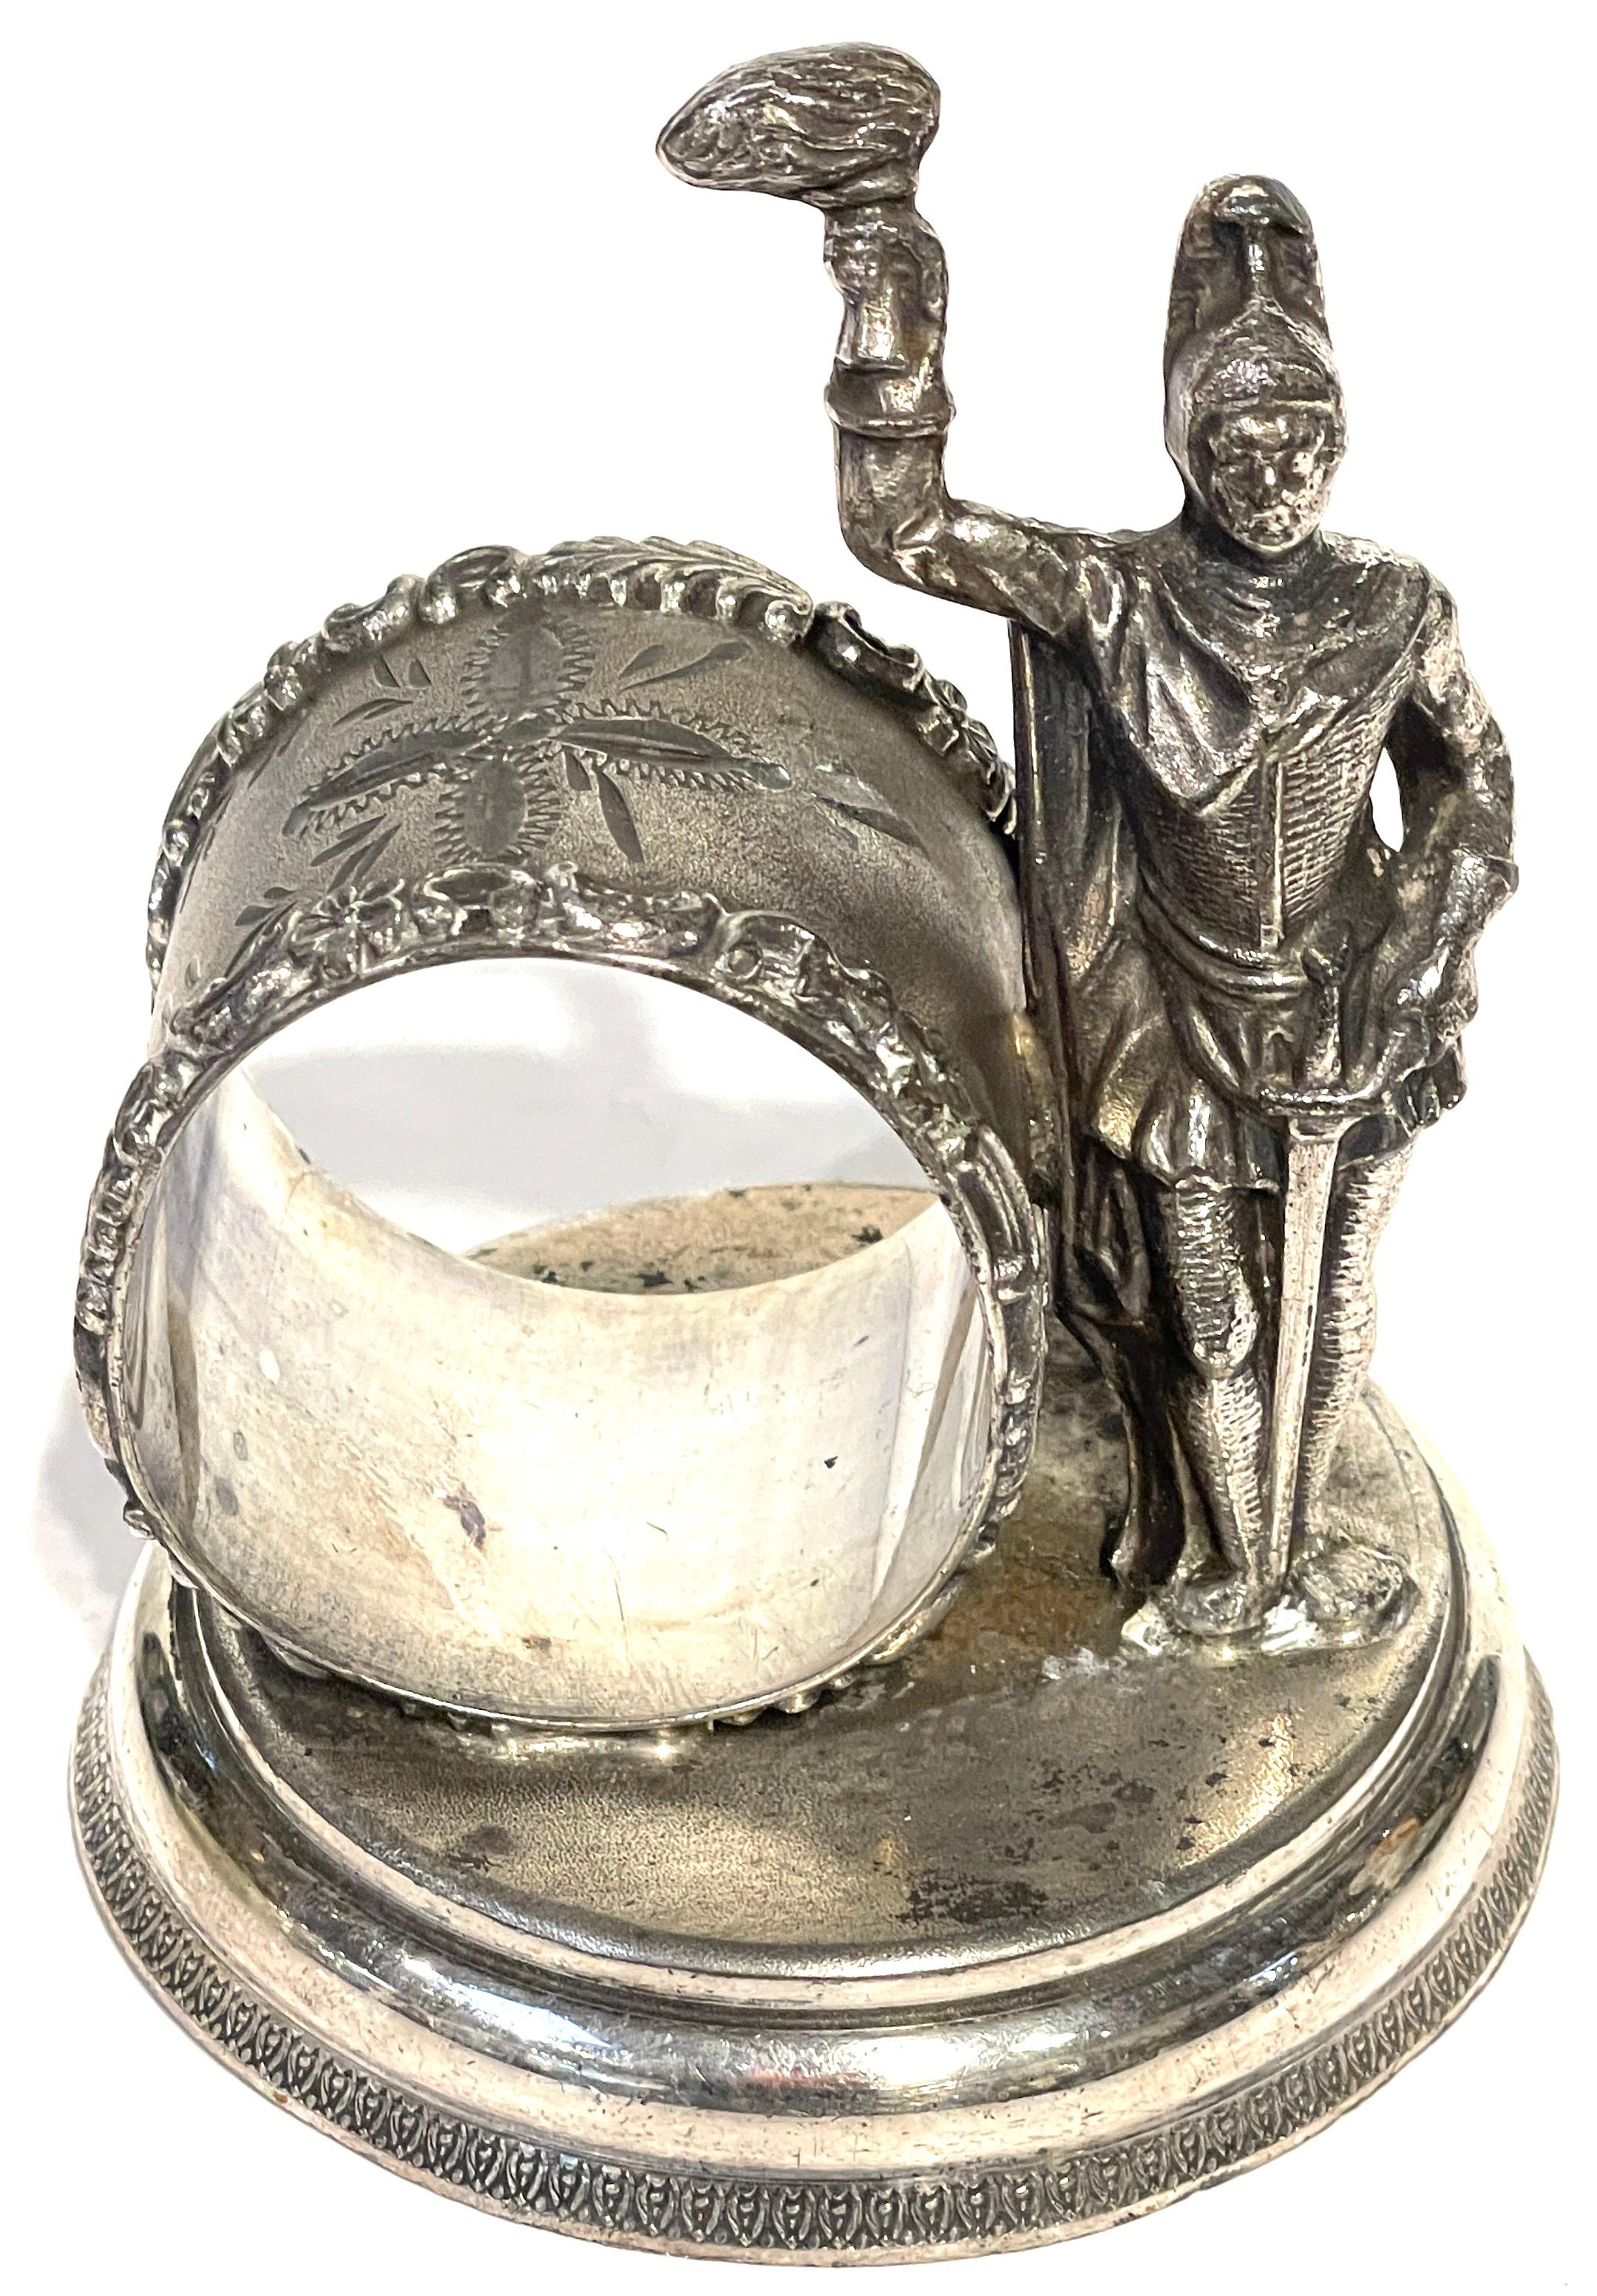 American Silverplated Figural Napkin Ring of a Knight with Sword and Torch 
Knickerbocker Silver Company, USA
This unique American silverplated figural napkin ring by Knickerbocker Silver Company showcases a knight in full regalia, a captivating